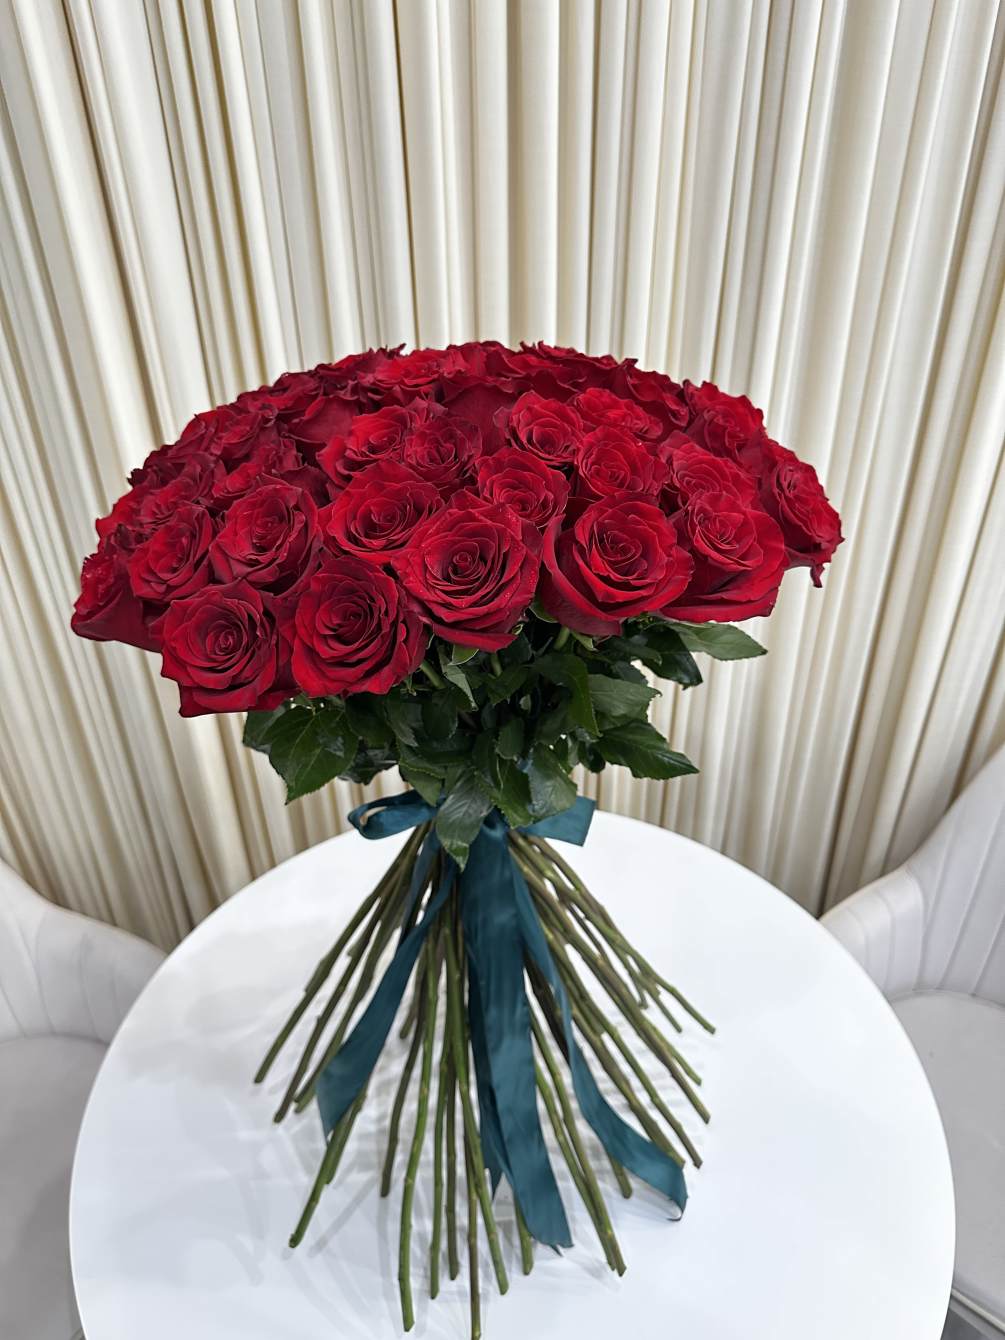 This captivating spiral bouquet of 50 red roses is the perfect way